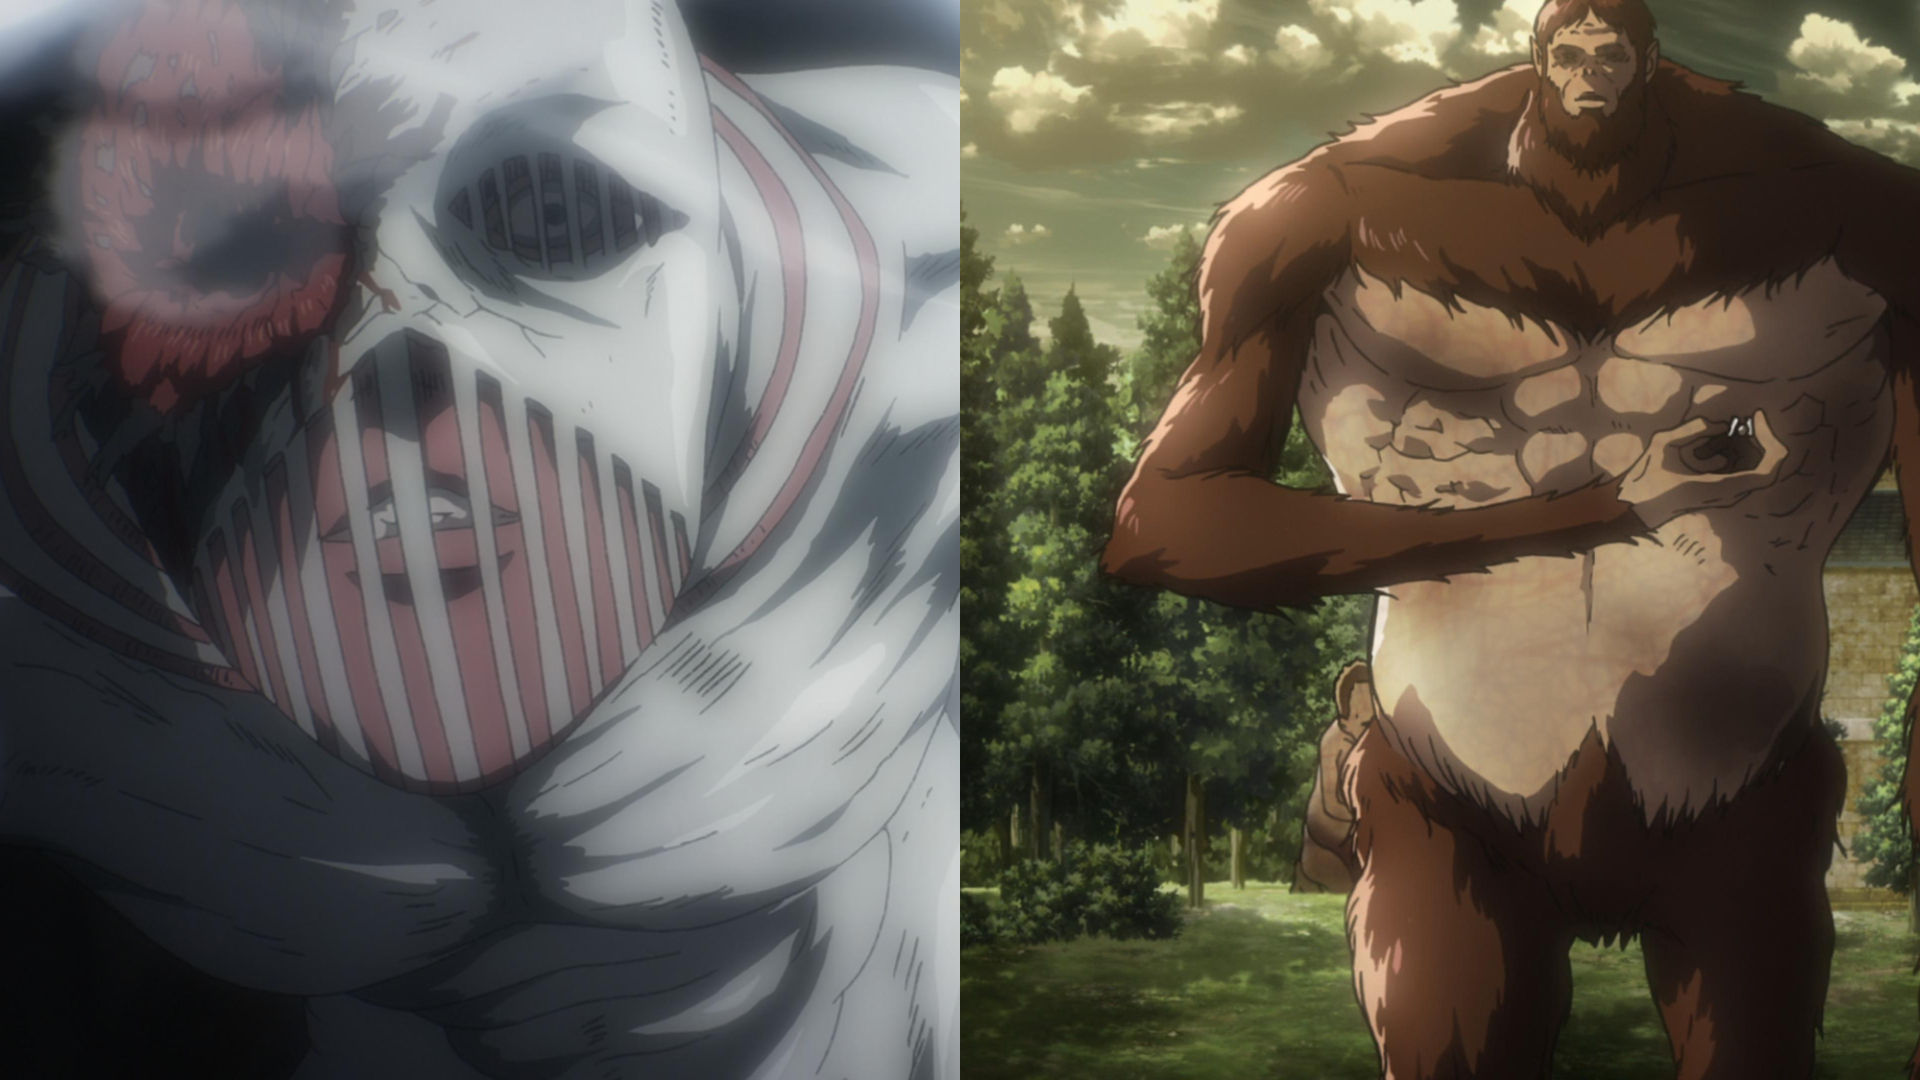 Attack on Titan - From allies to enemies, it's time to